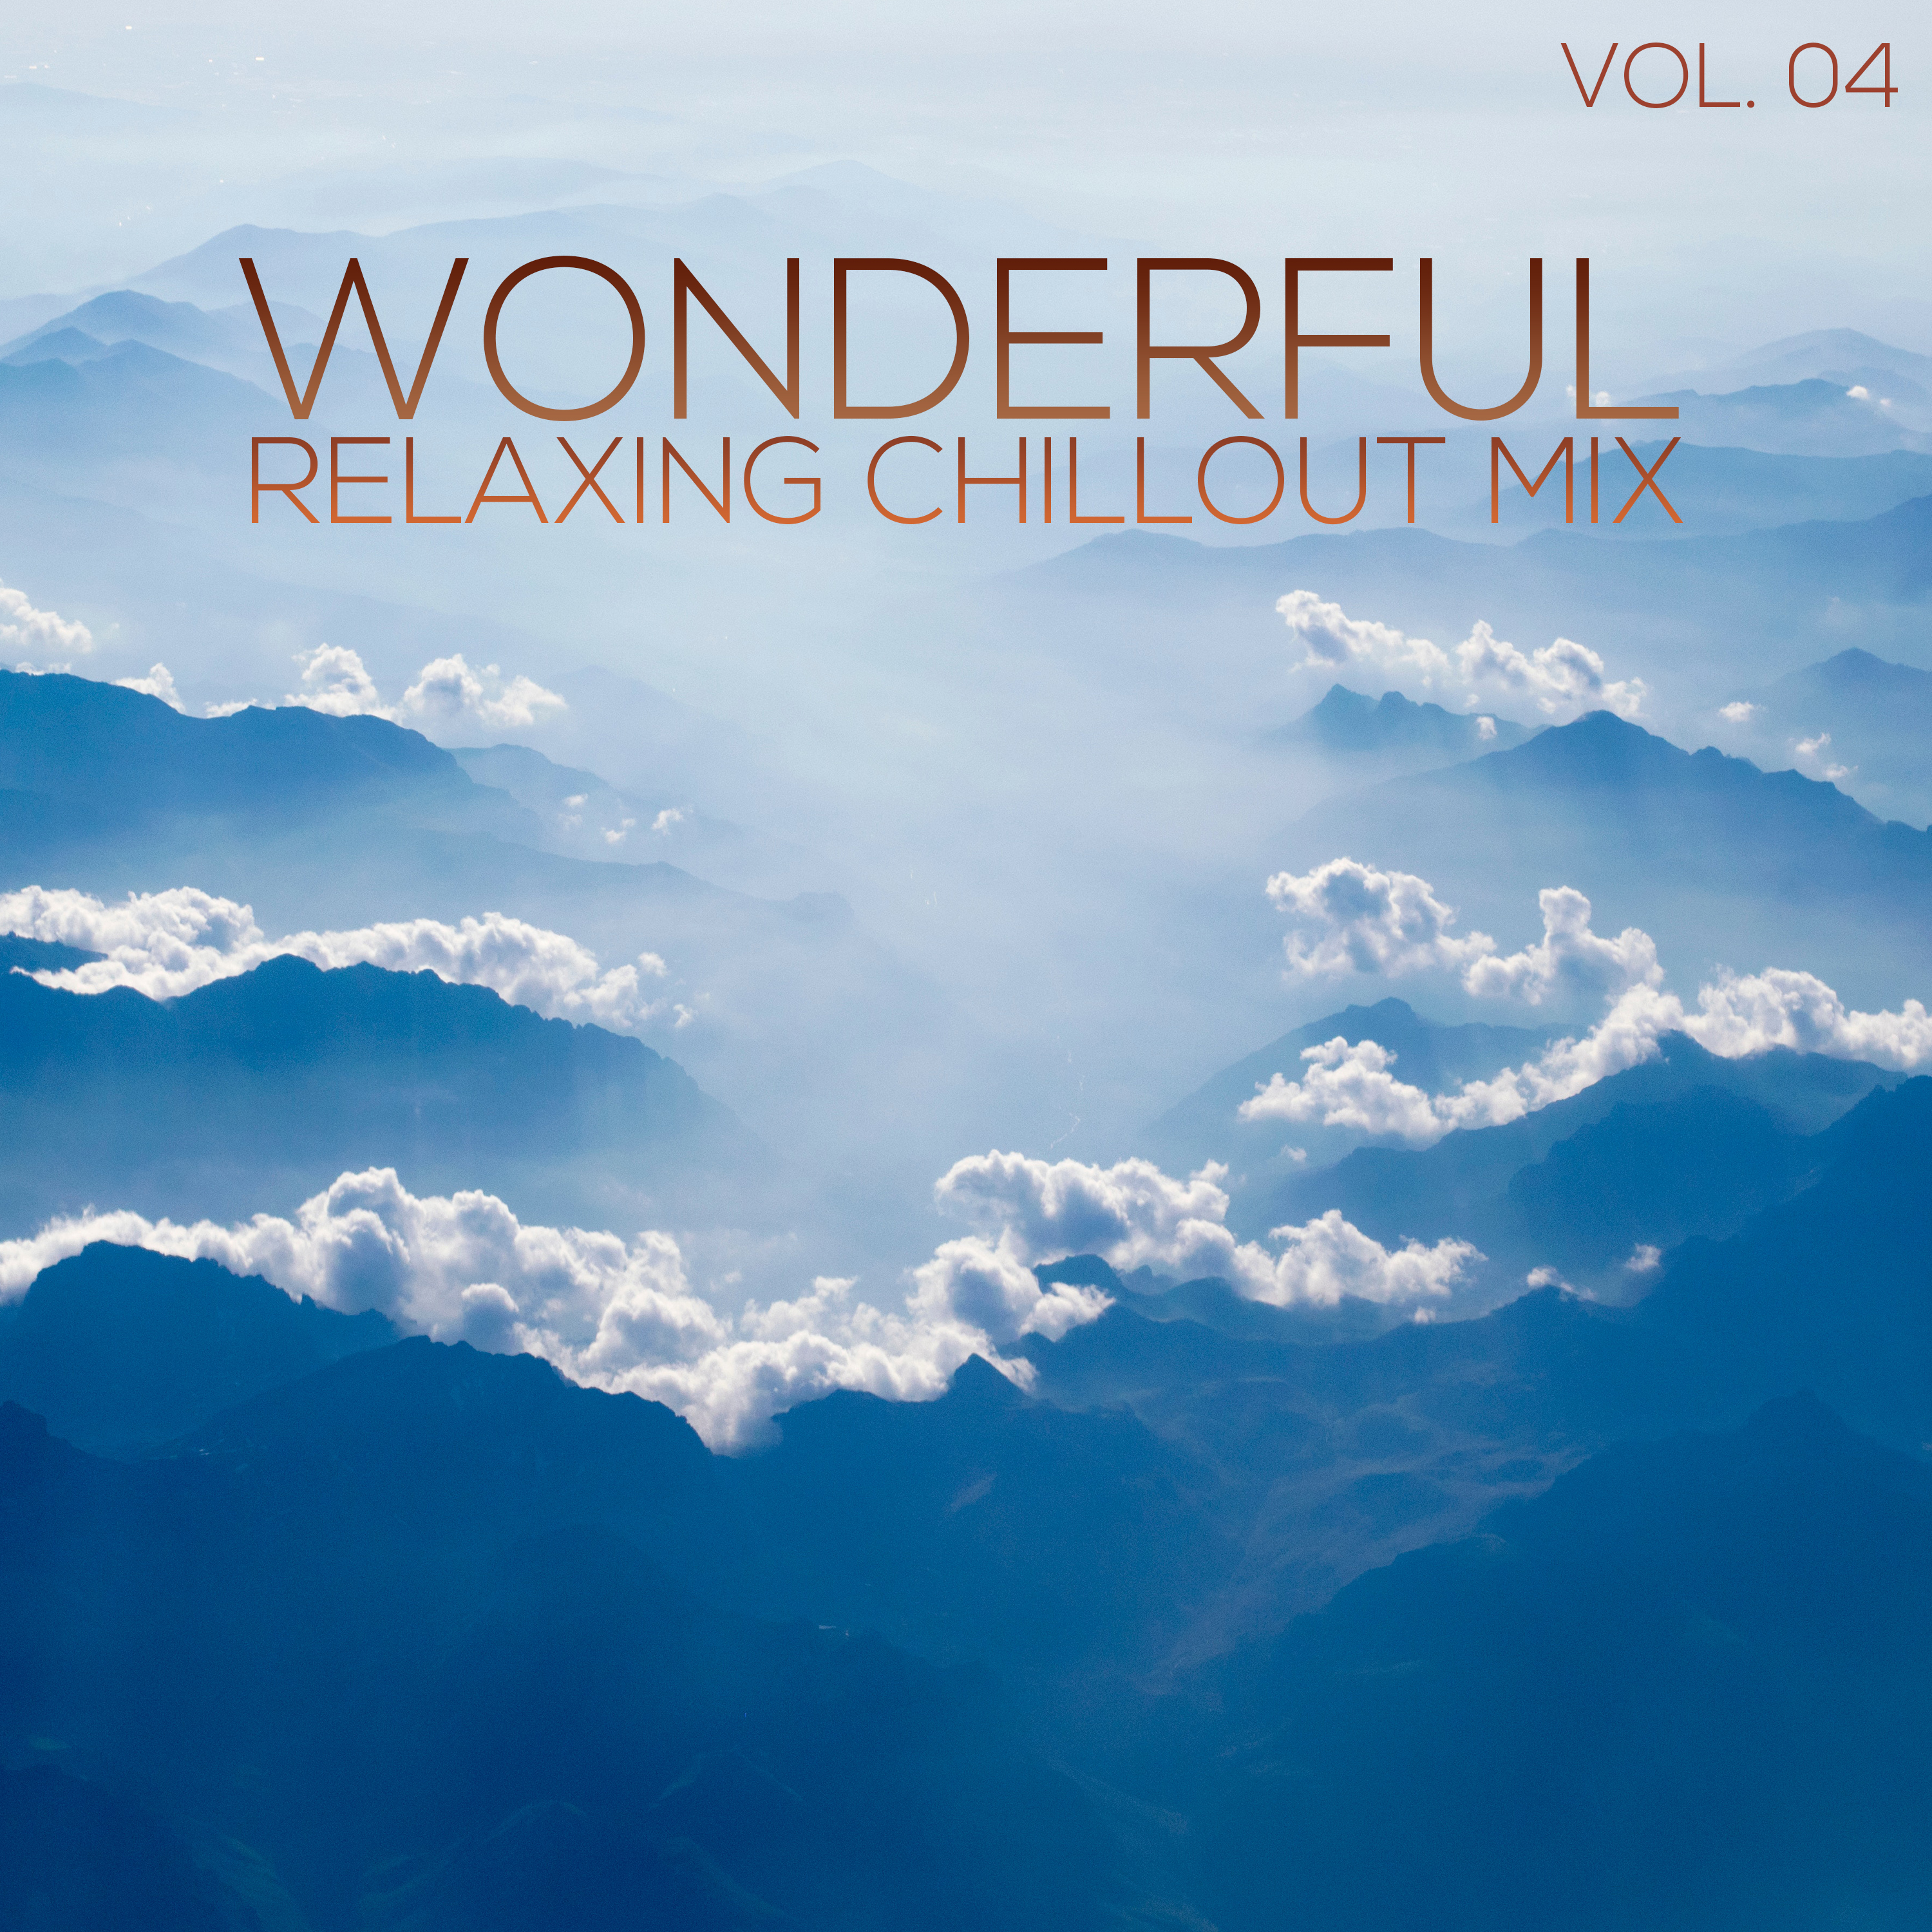 Wonderful Chillout Relaxing Music Mix, Vol. 04 (Compiled and Mixed by Deep Dreamer)